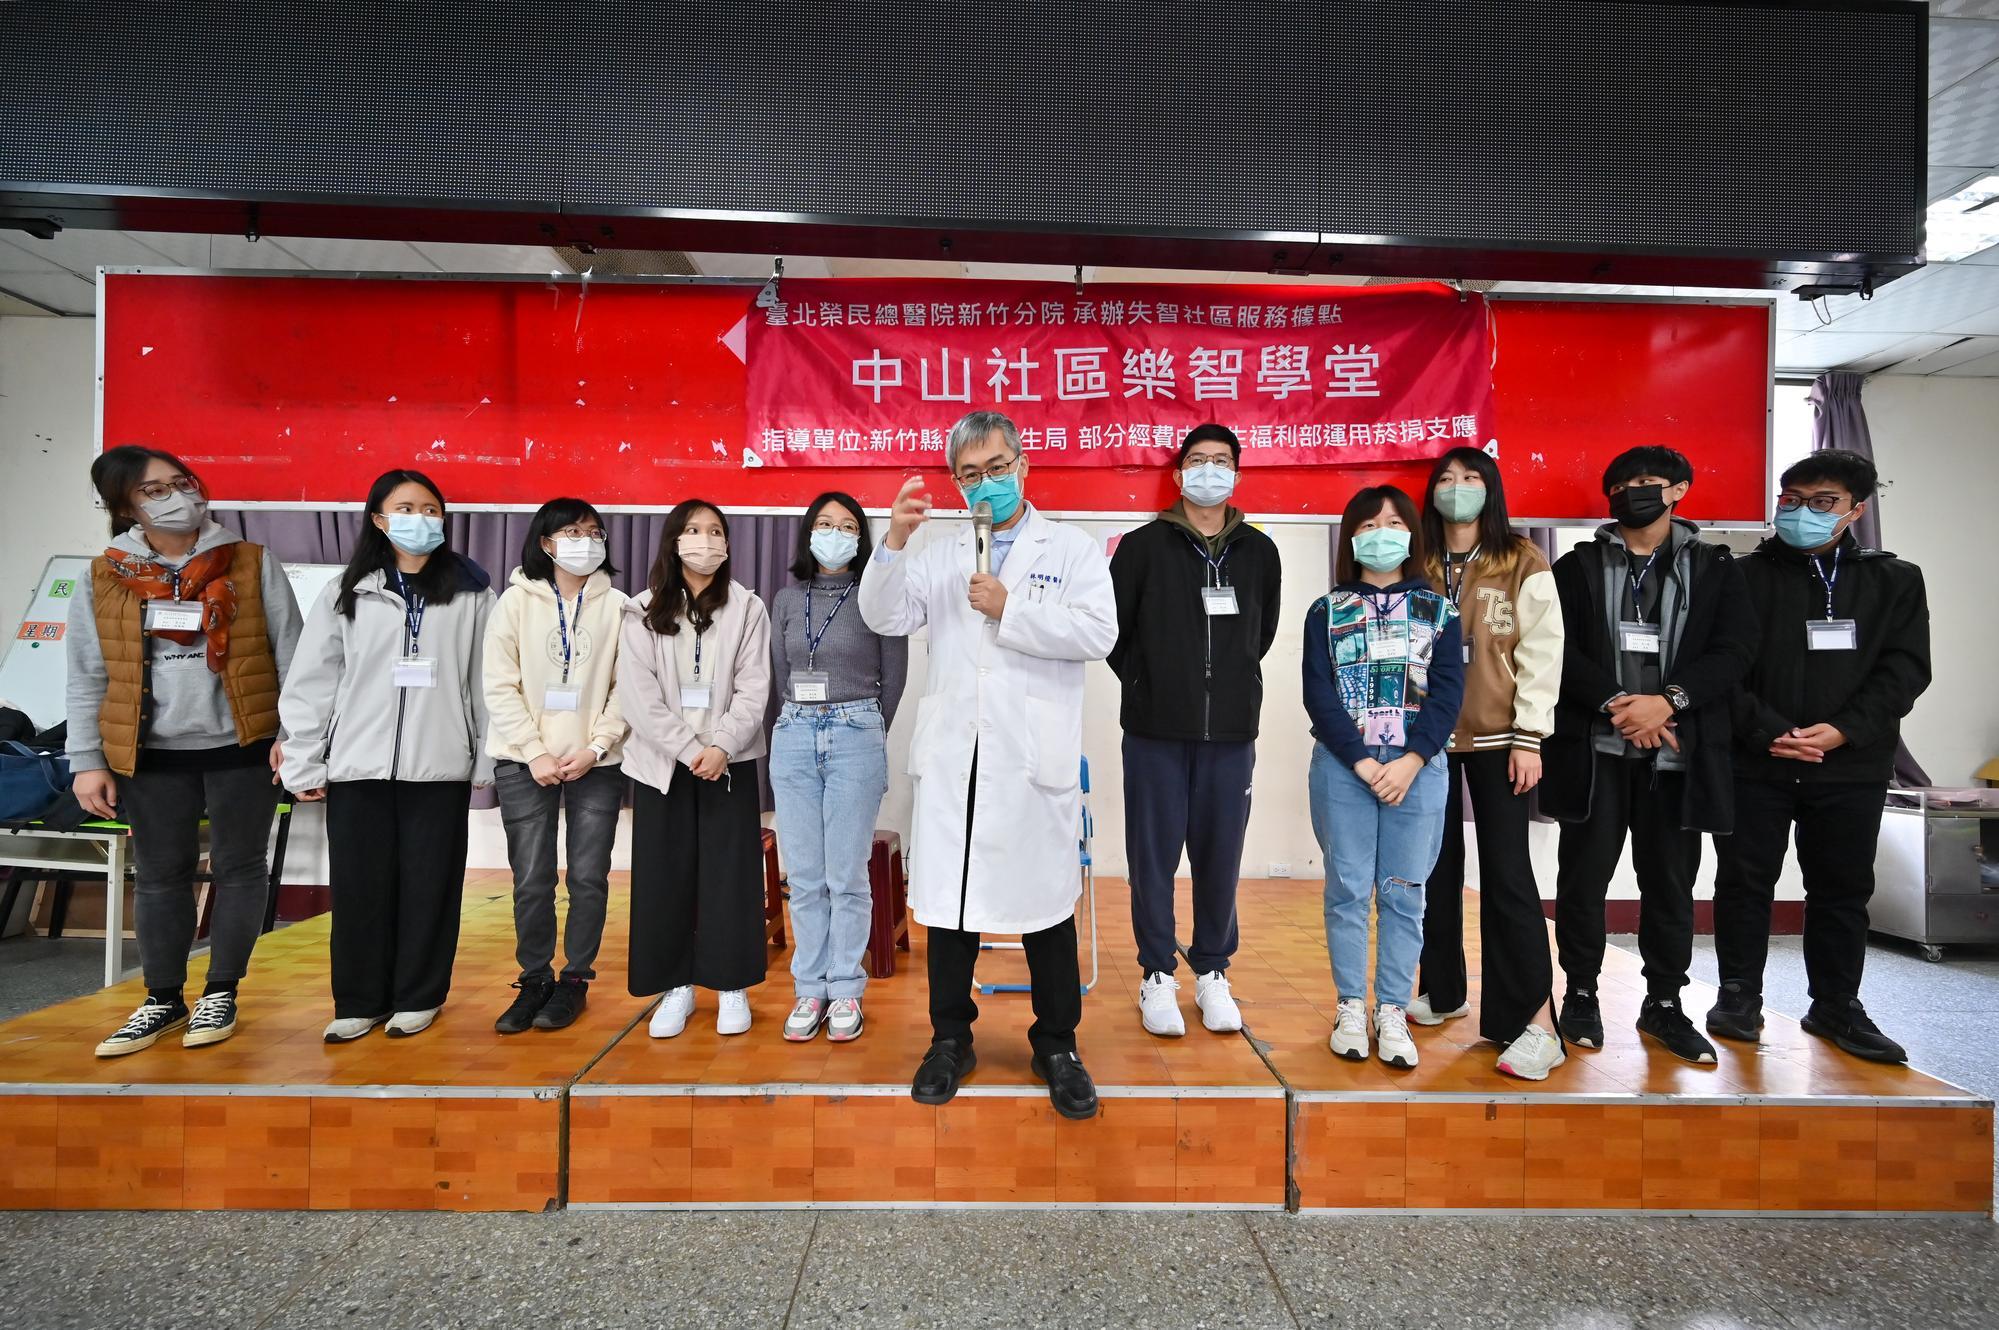 The visit by NTHU students to the Lezhi Learning Center in Zhongshan Village was led by Lin Ming-teng (林明燈), director of the Department of Psychiatry at the Hsinchu TVGH.